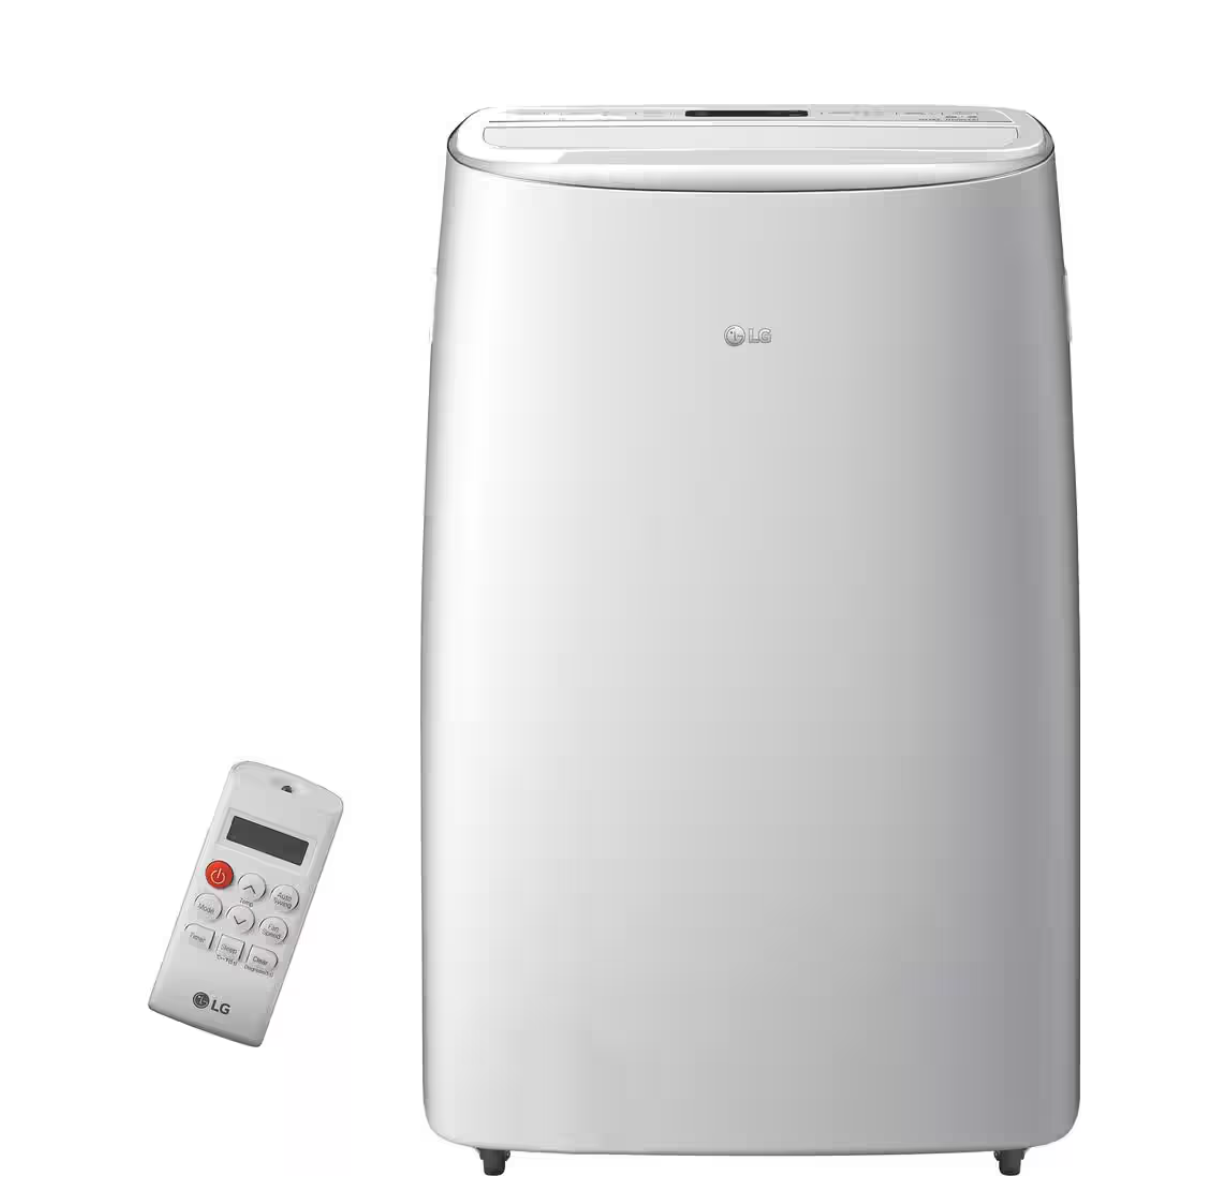 LG 10,000 BTU 115-Volt Portable Air Conditioner Cools 450 sq. ft. with Dual Inverter, Quiet, Wi-Fi and LCD Remote in White